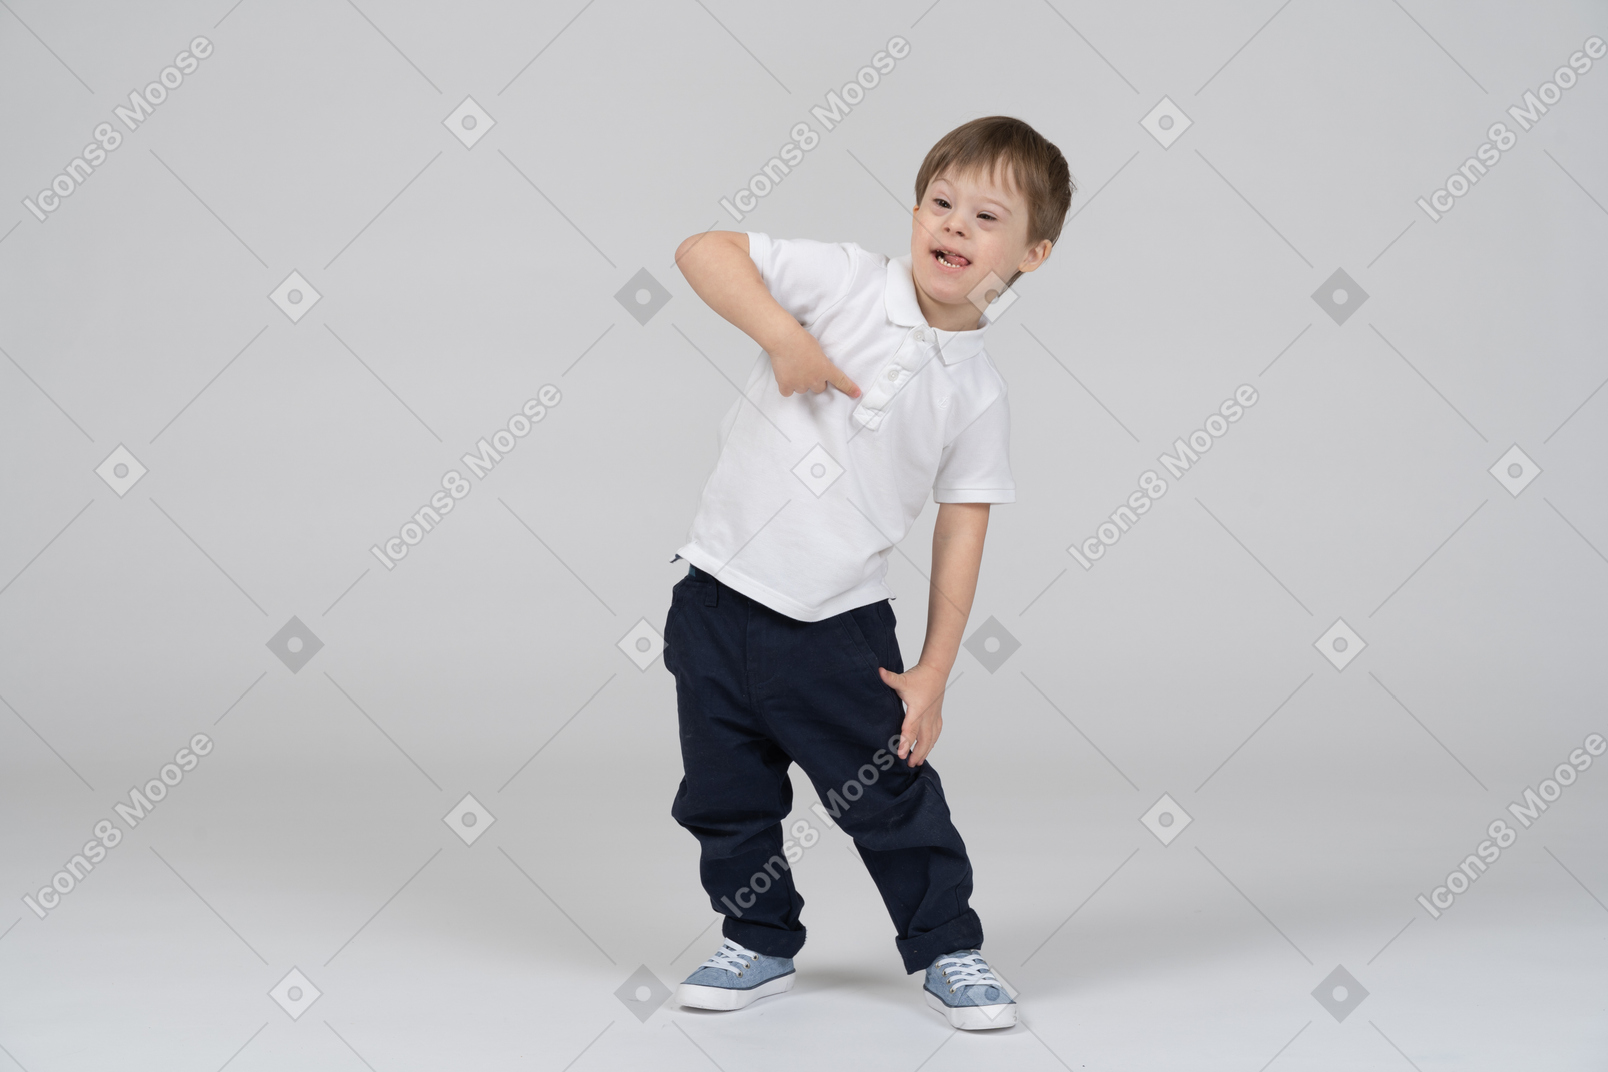 child pointing to himself